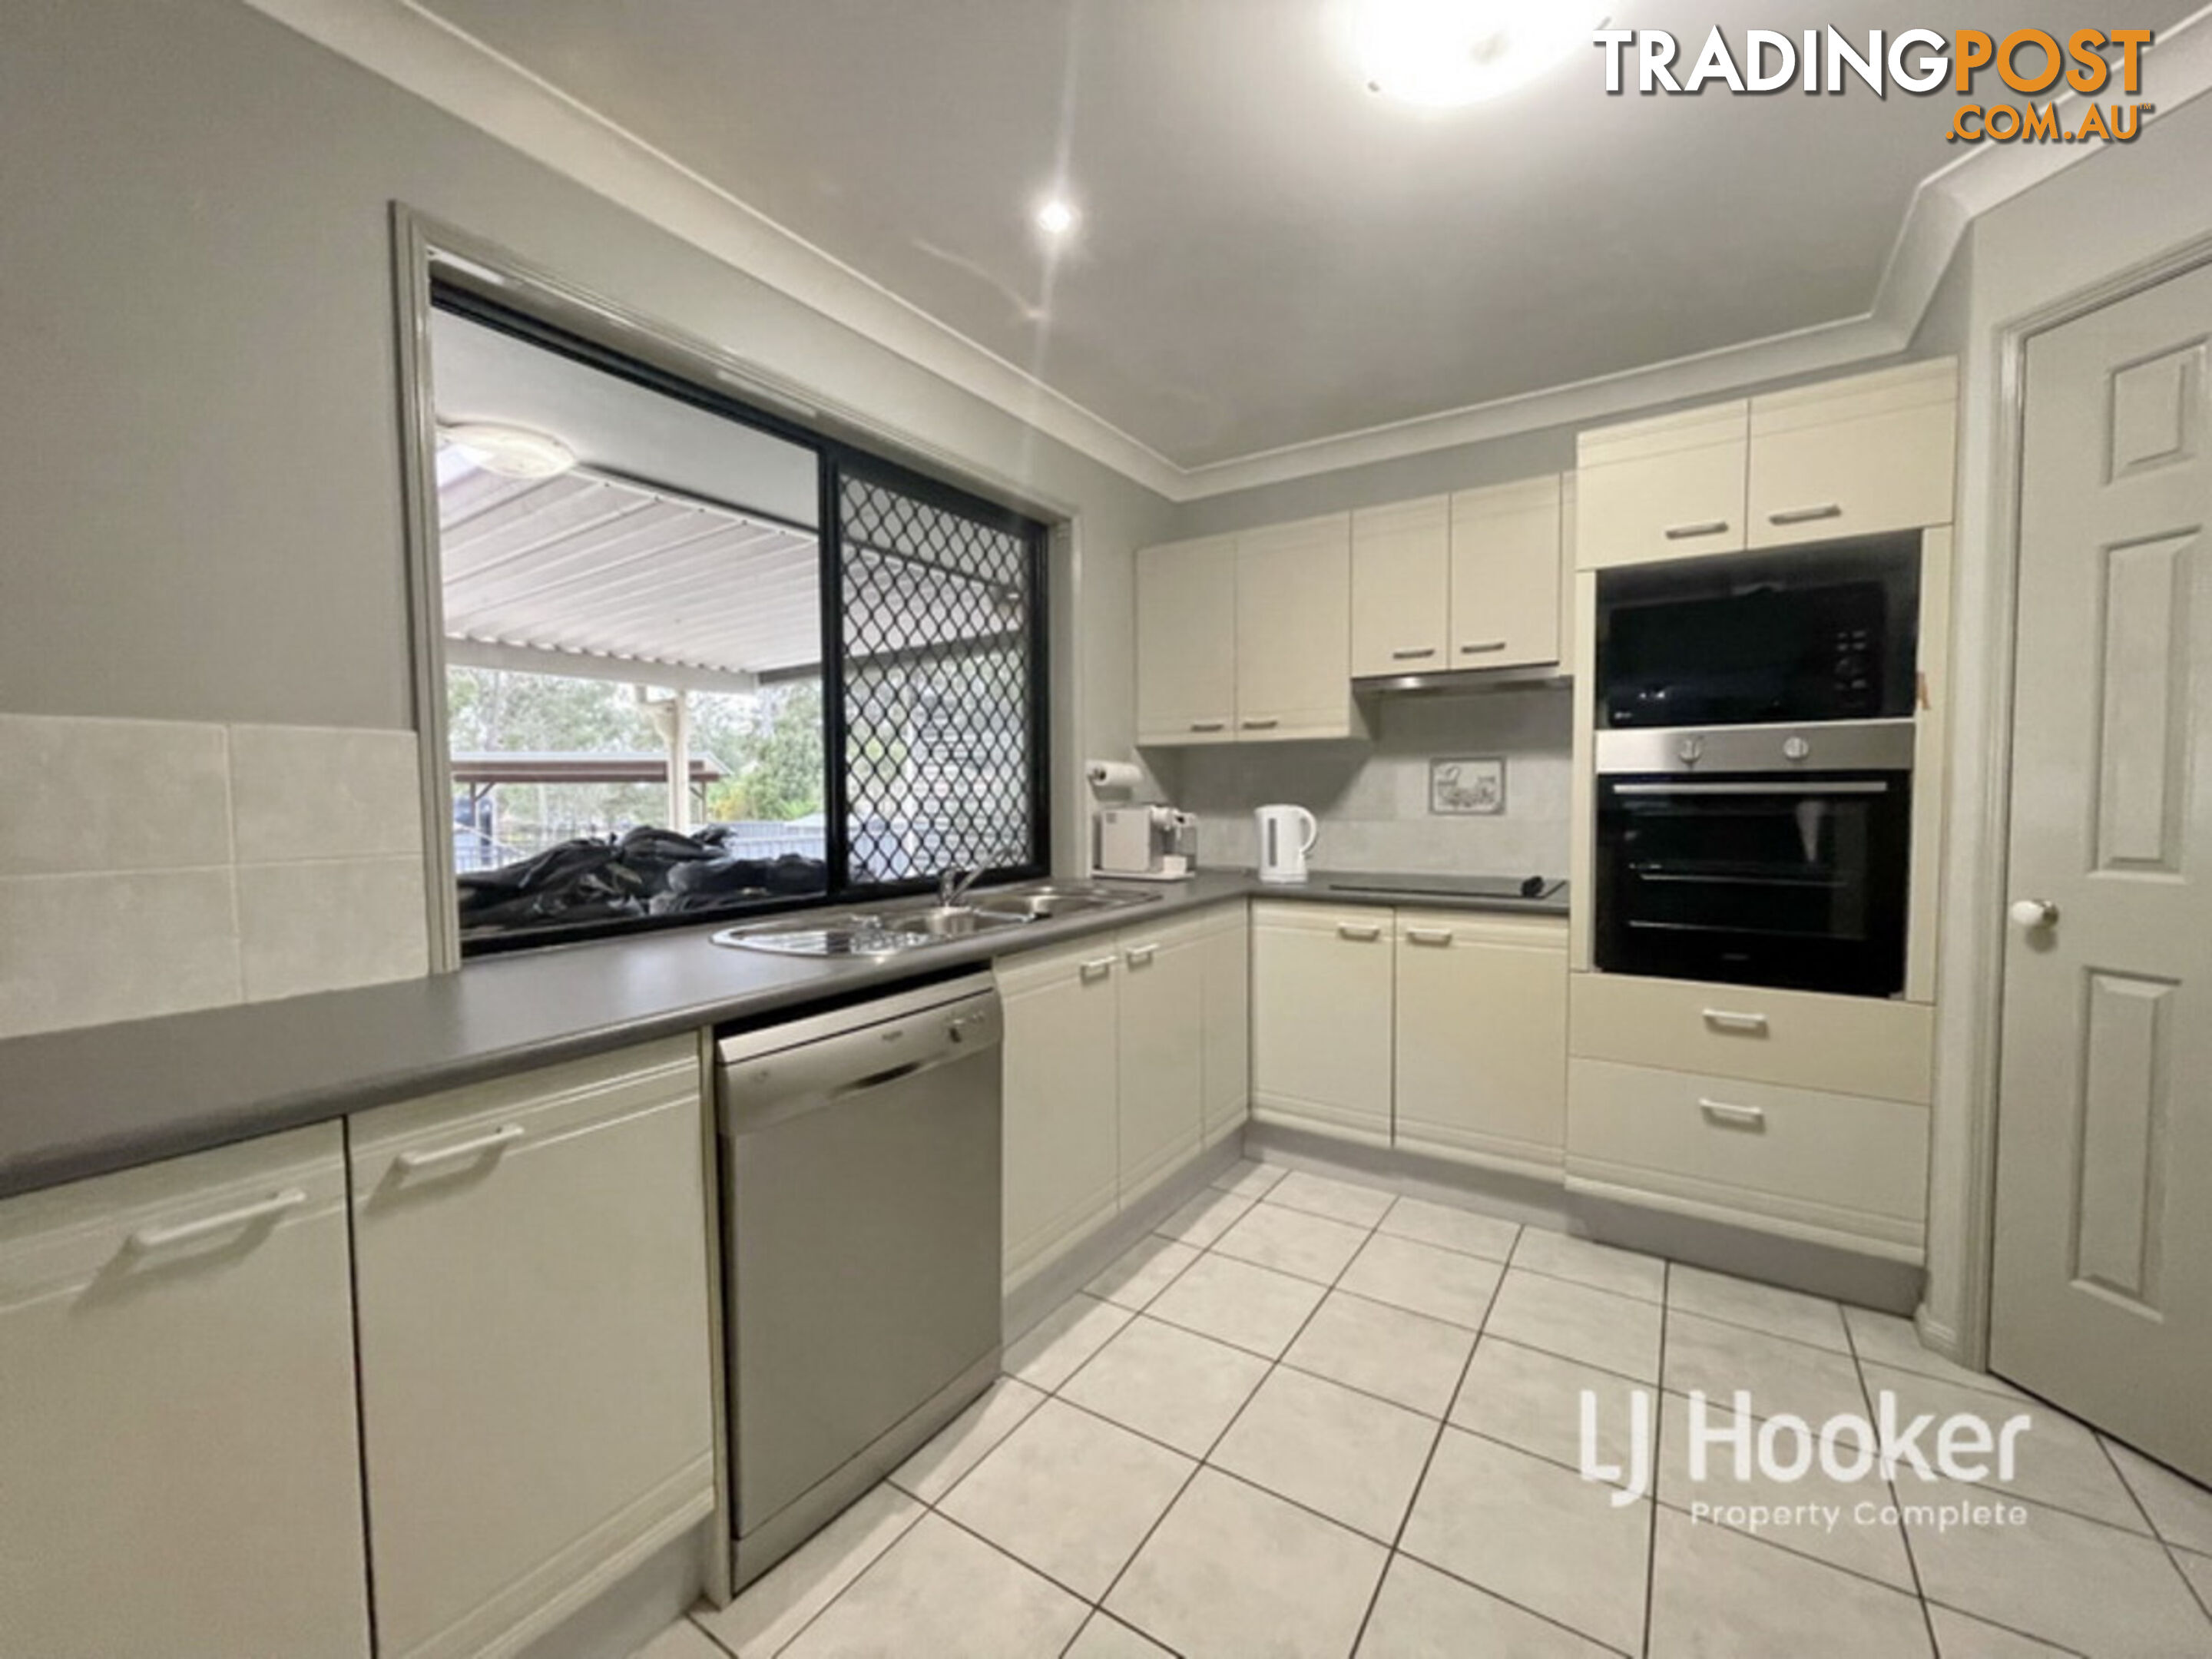 160-162 Lyon Drive NEW BEITH QLD 4124